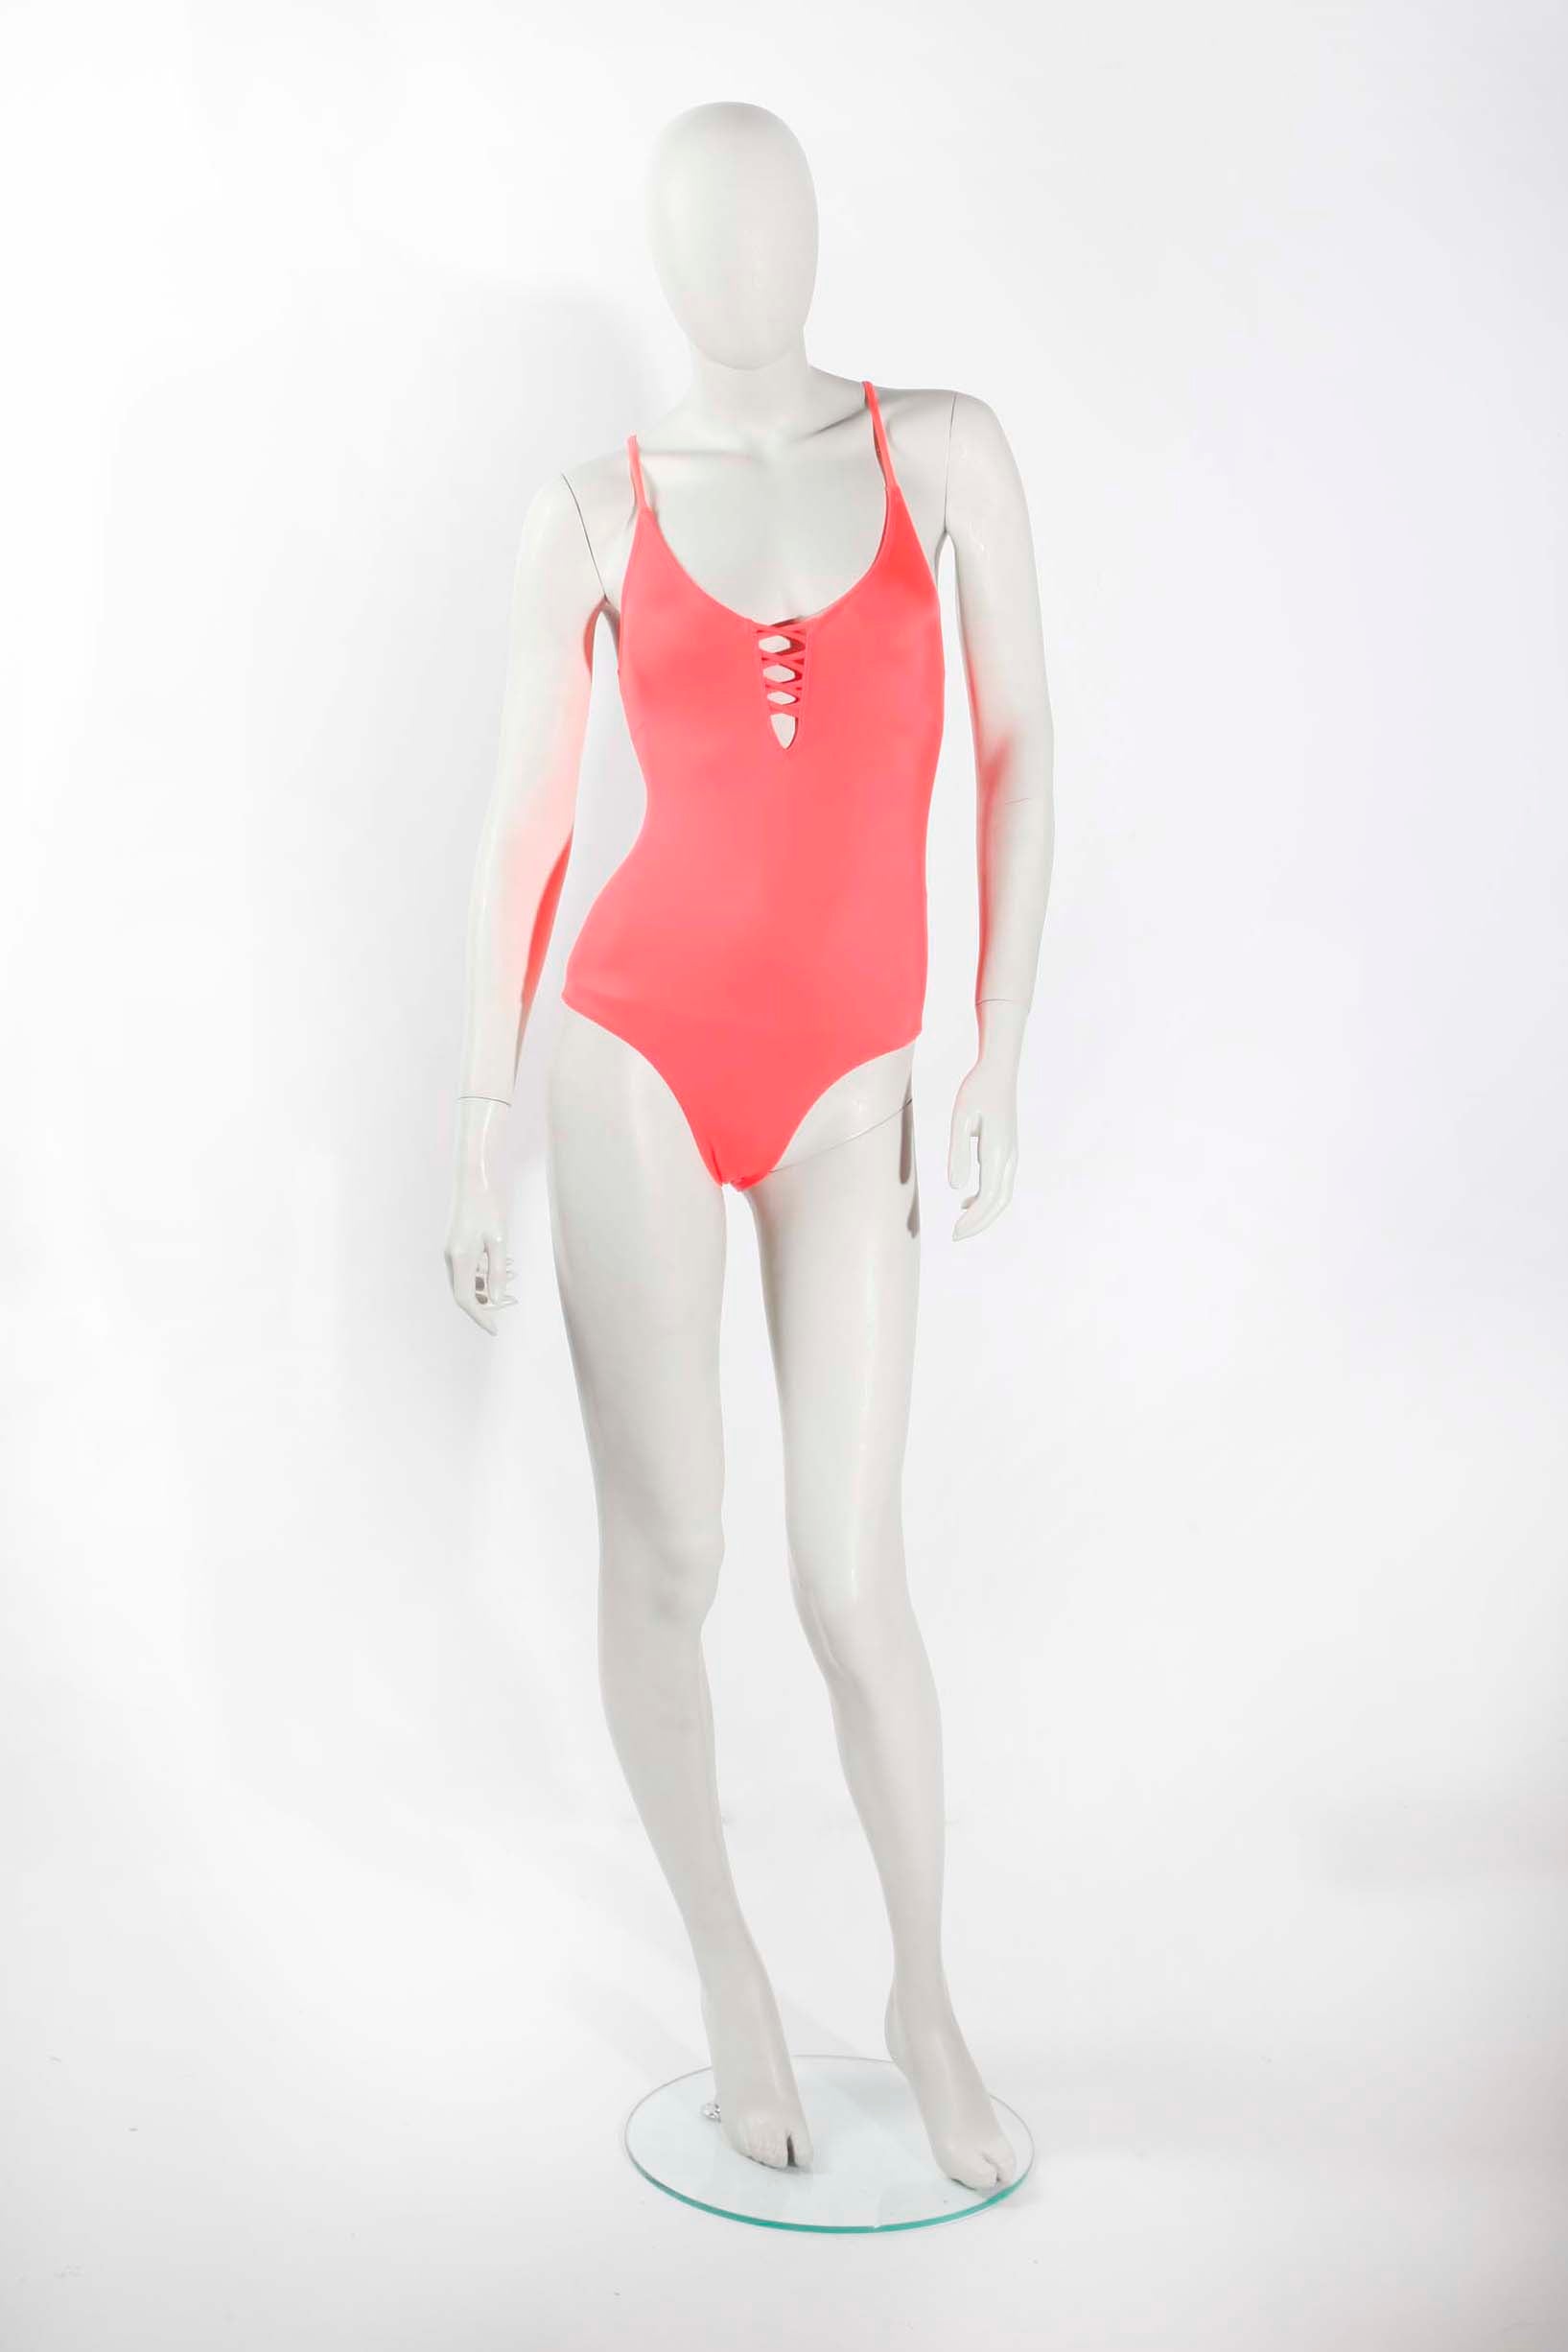 Highlighter Pink Swimsuit (XSmall)